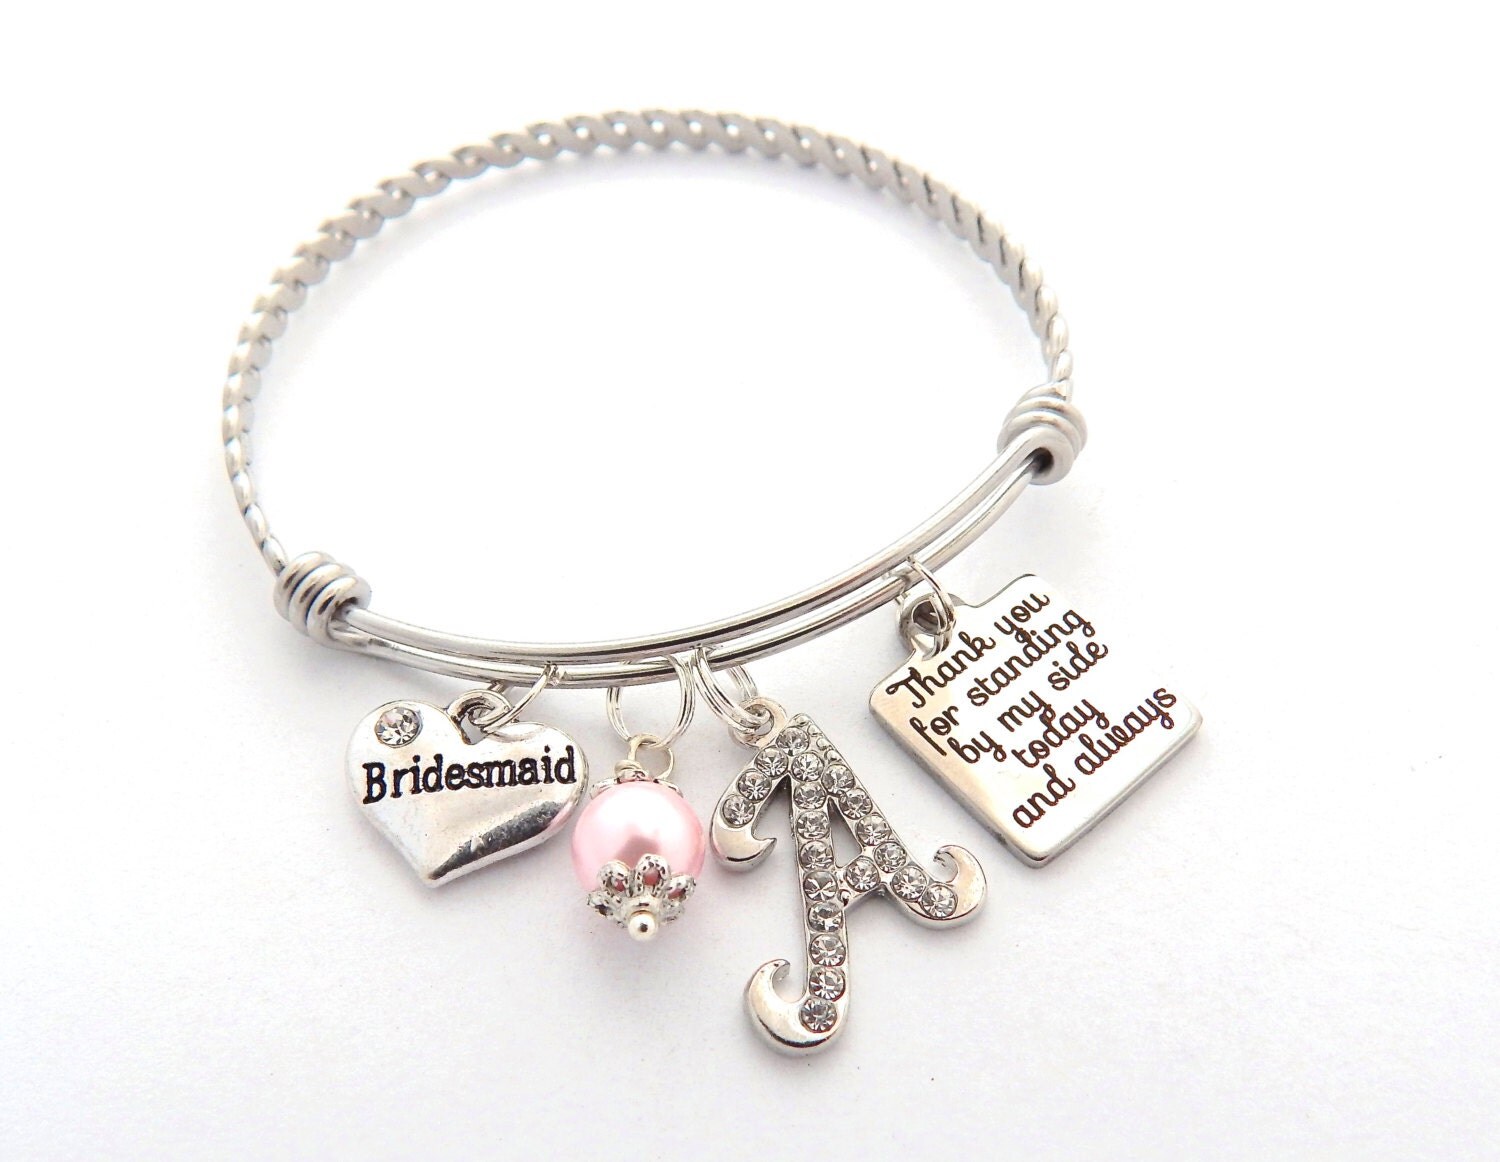 Personalized Bridesmaid Gift, Gifts for Bridesmaids ,Bridal Party Gift, Bridal Party Jewelry,Wedding bracelet,Mom,Mother of the Bride Gift